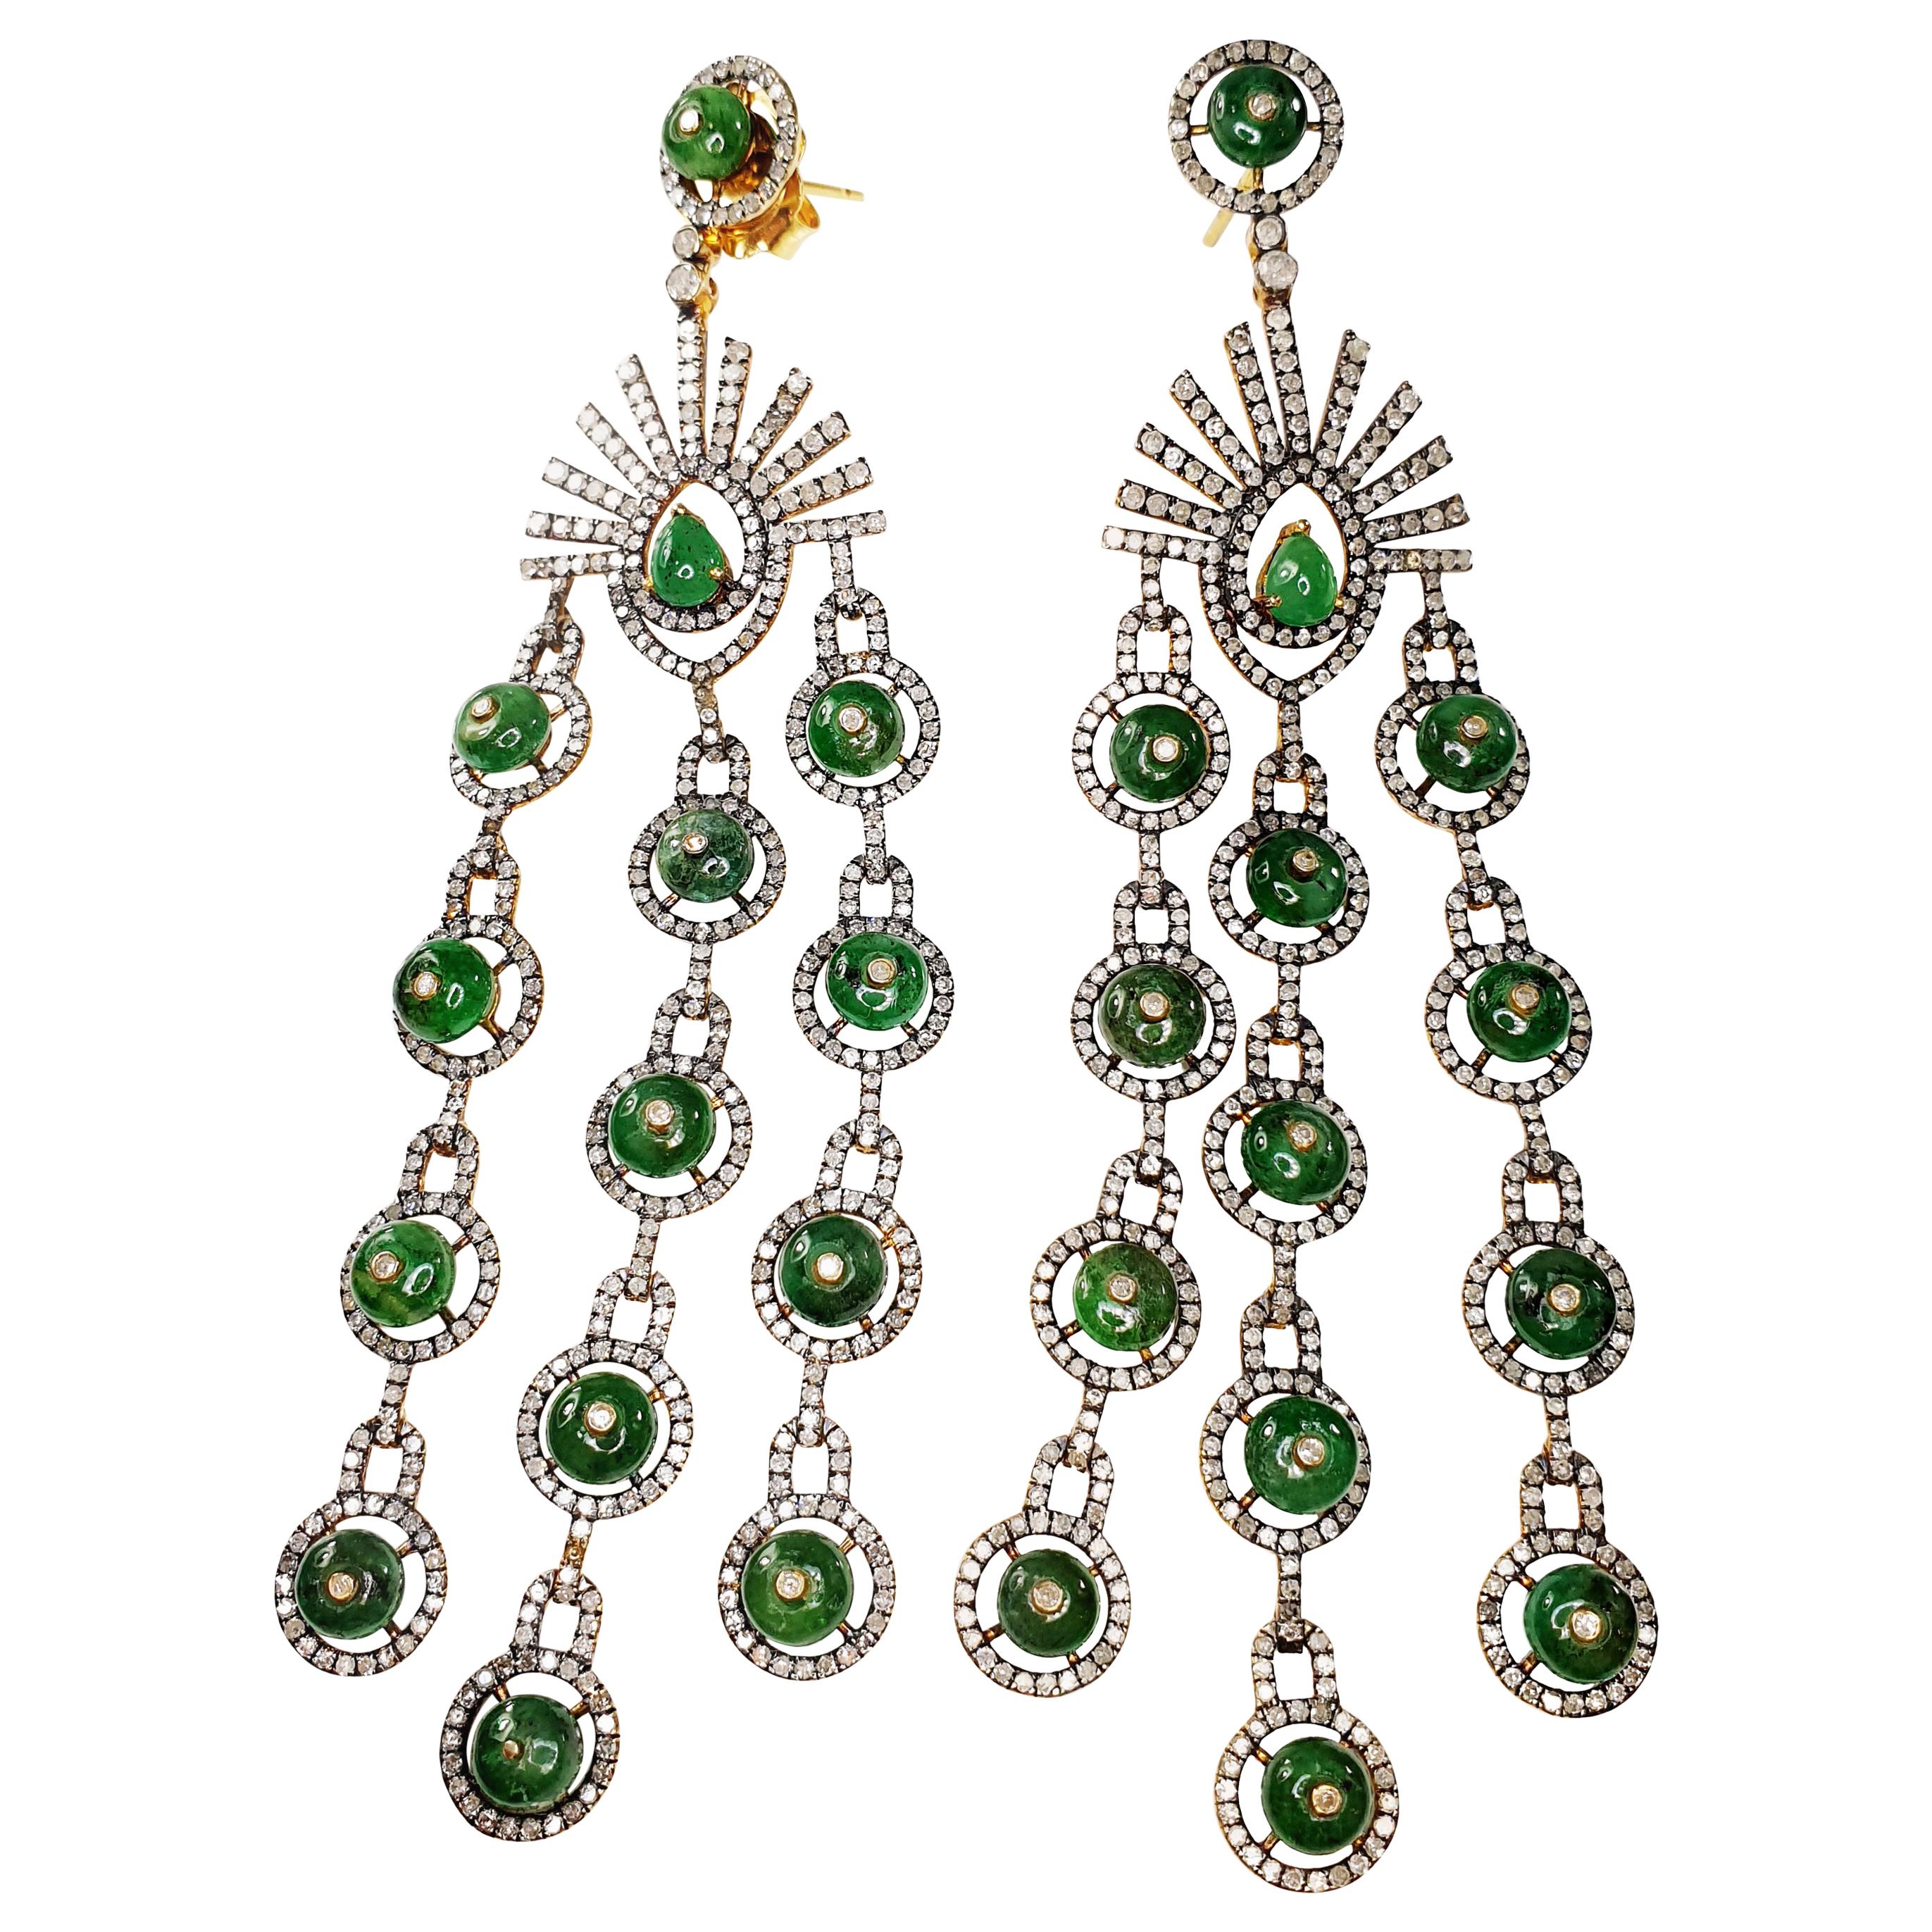 18 Karat Gold and Silver Earrings with Diamonds and Emeralds